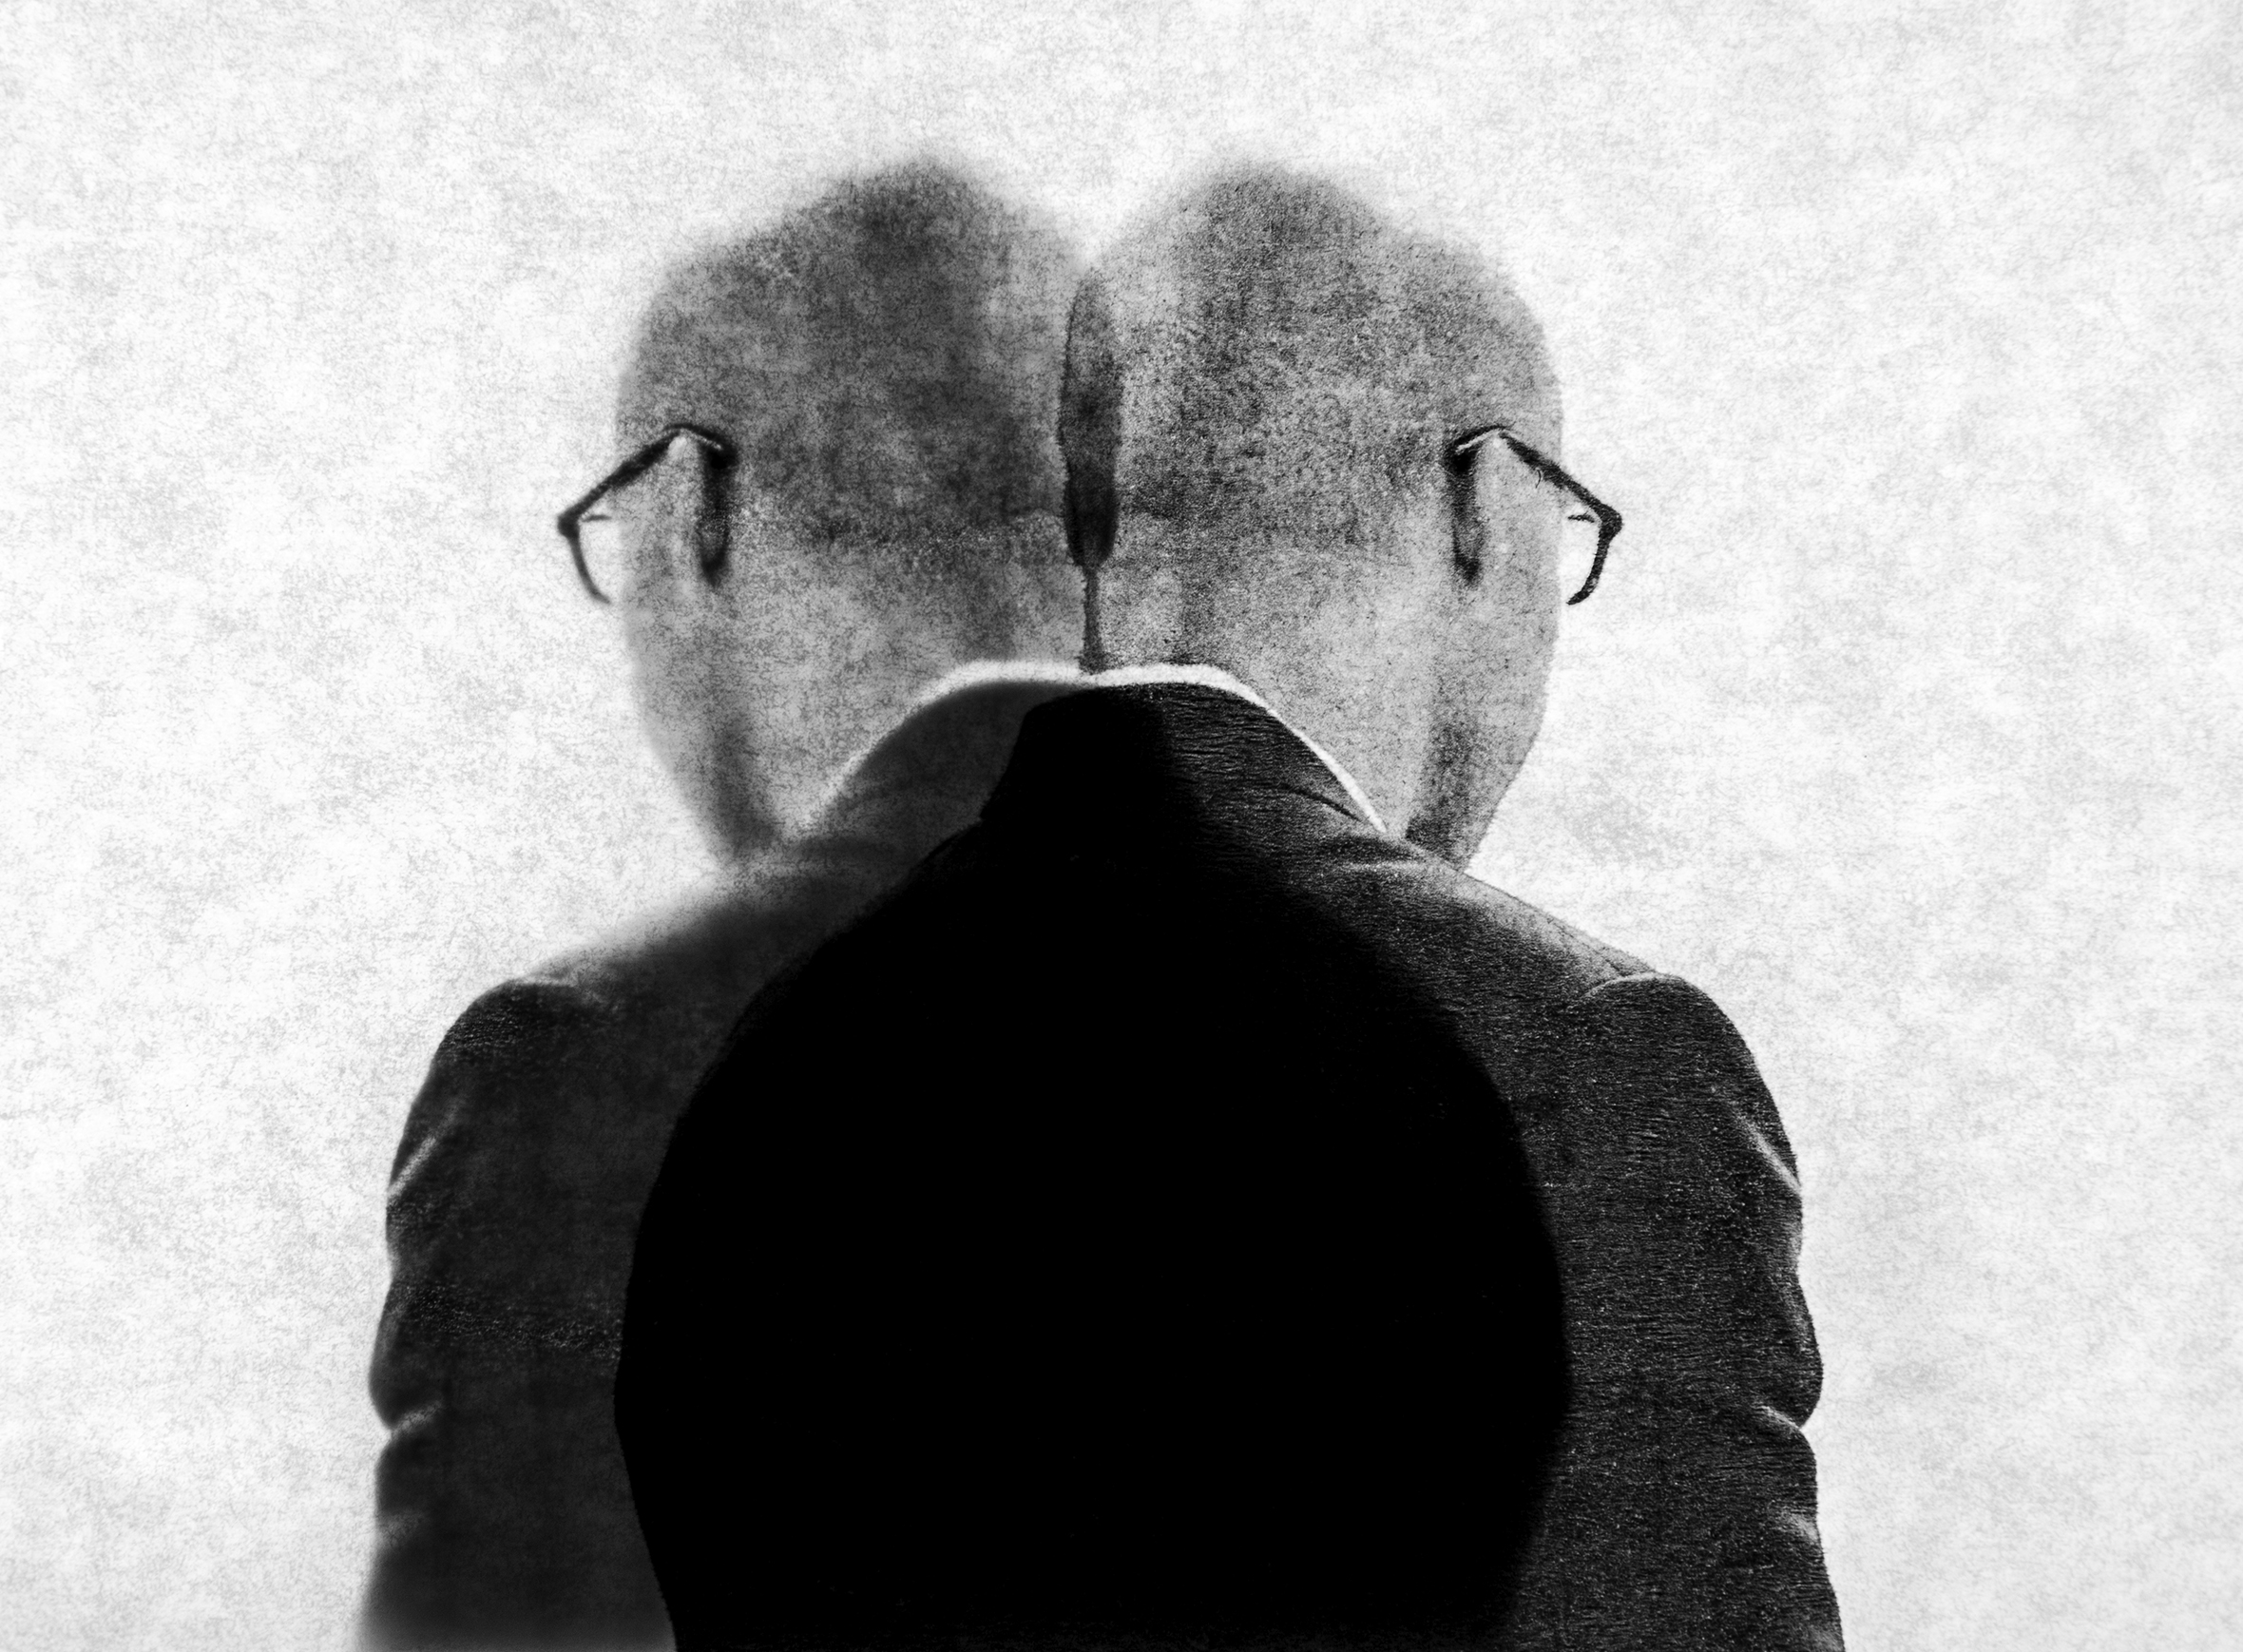 A man with close-cropped hair and black-framed glasses wearing a white shirt and dark suit coat is seen from the back. The man’s image has been duplicated and placed together so that there is one trunk but two heads looking in opposite directions.